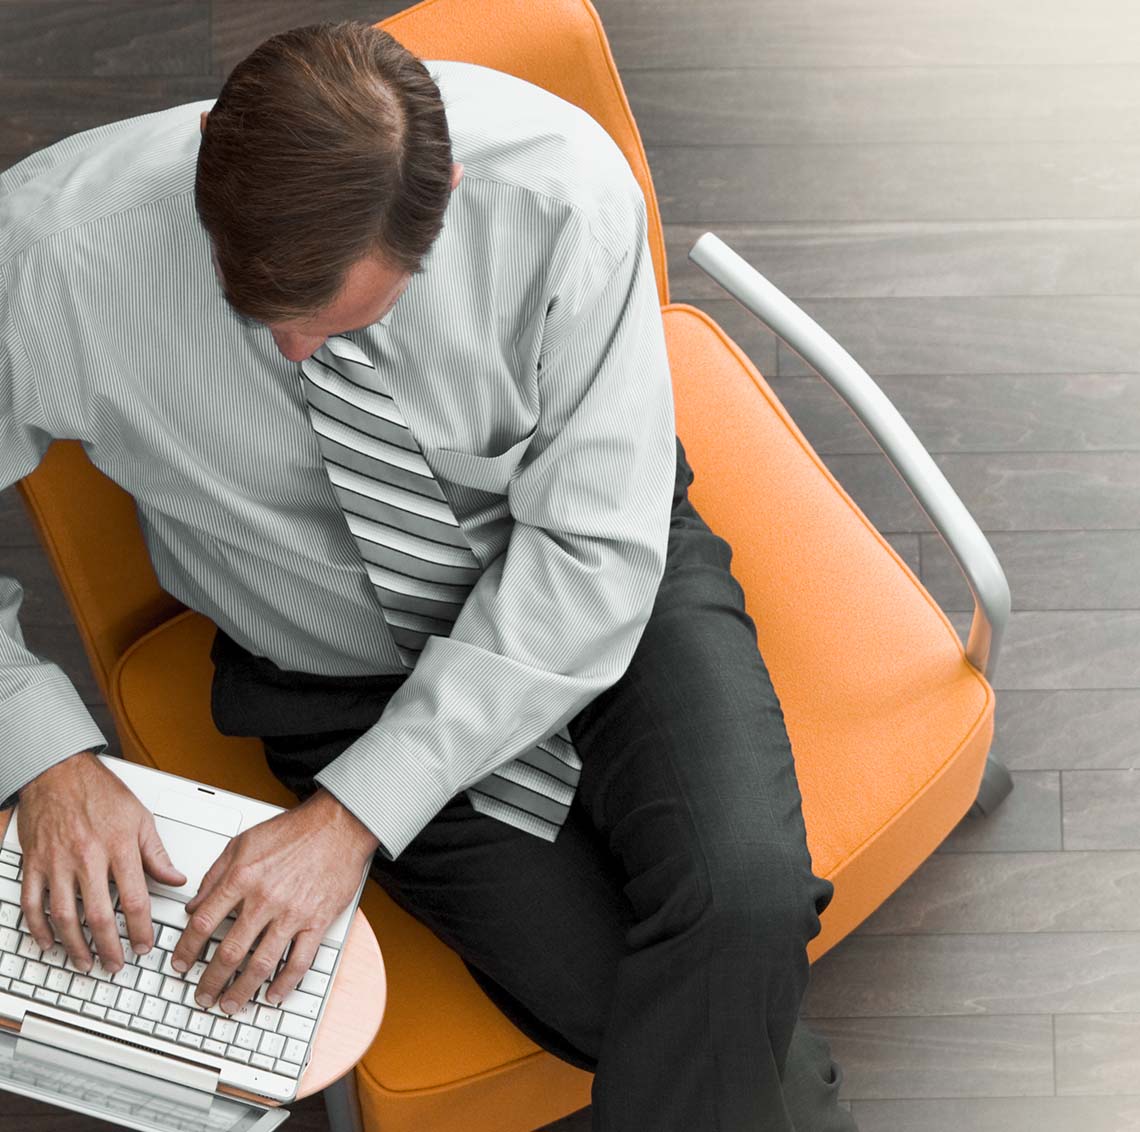 Person sitting in a chair working on a laptop